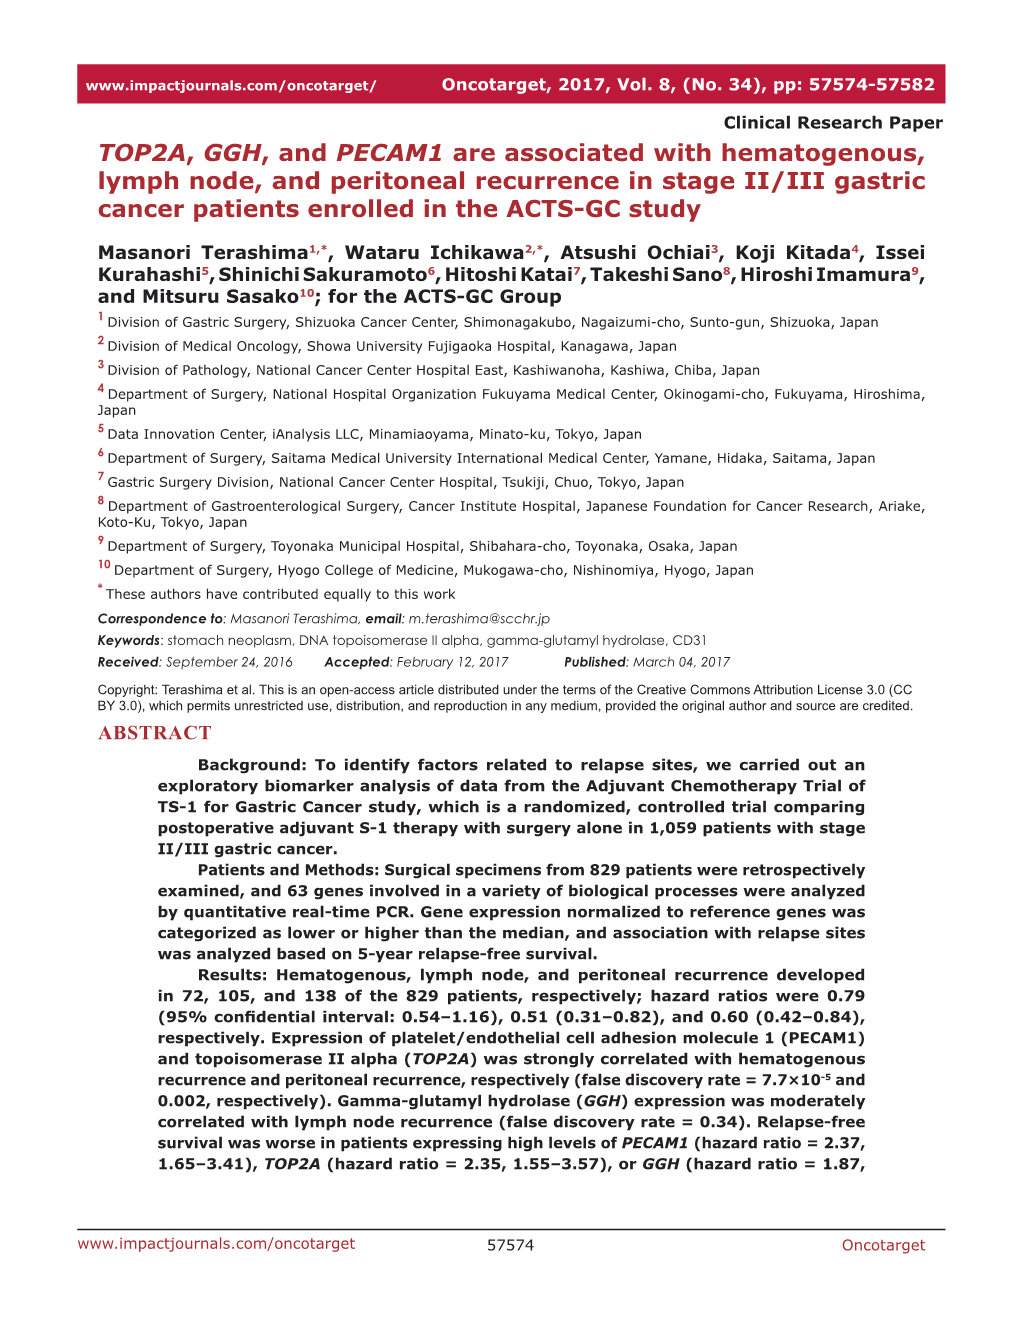 TOP2A, GGH, and PECAM1 Are Associated with Hematogenous, Lymph Node, and Peritoneal Recurrence in Stage II/III Gastric Cancer Patients Enrolled in the ACTS-GC Study